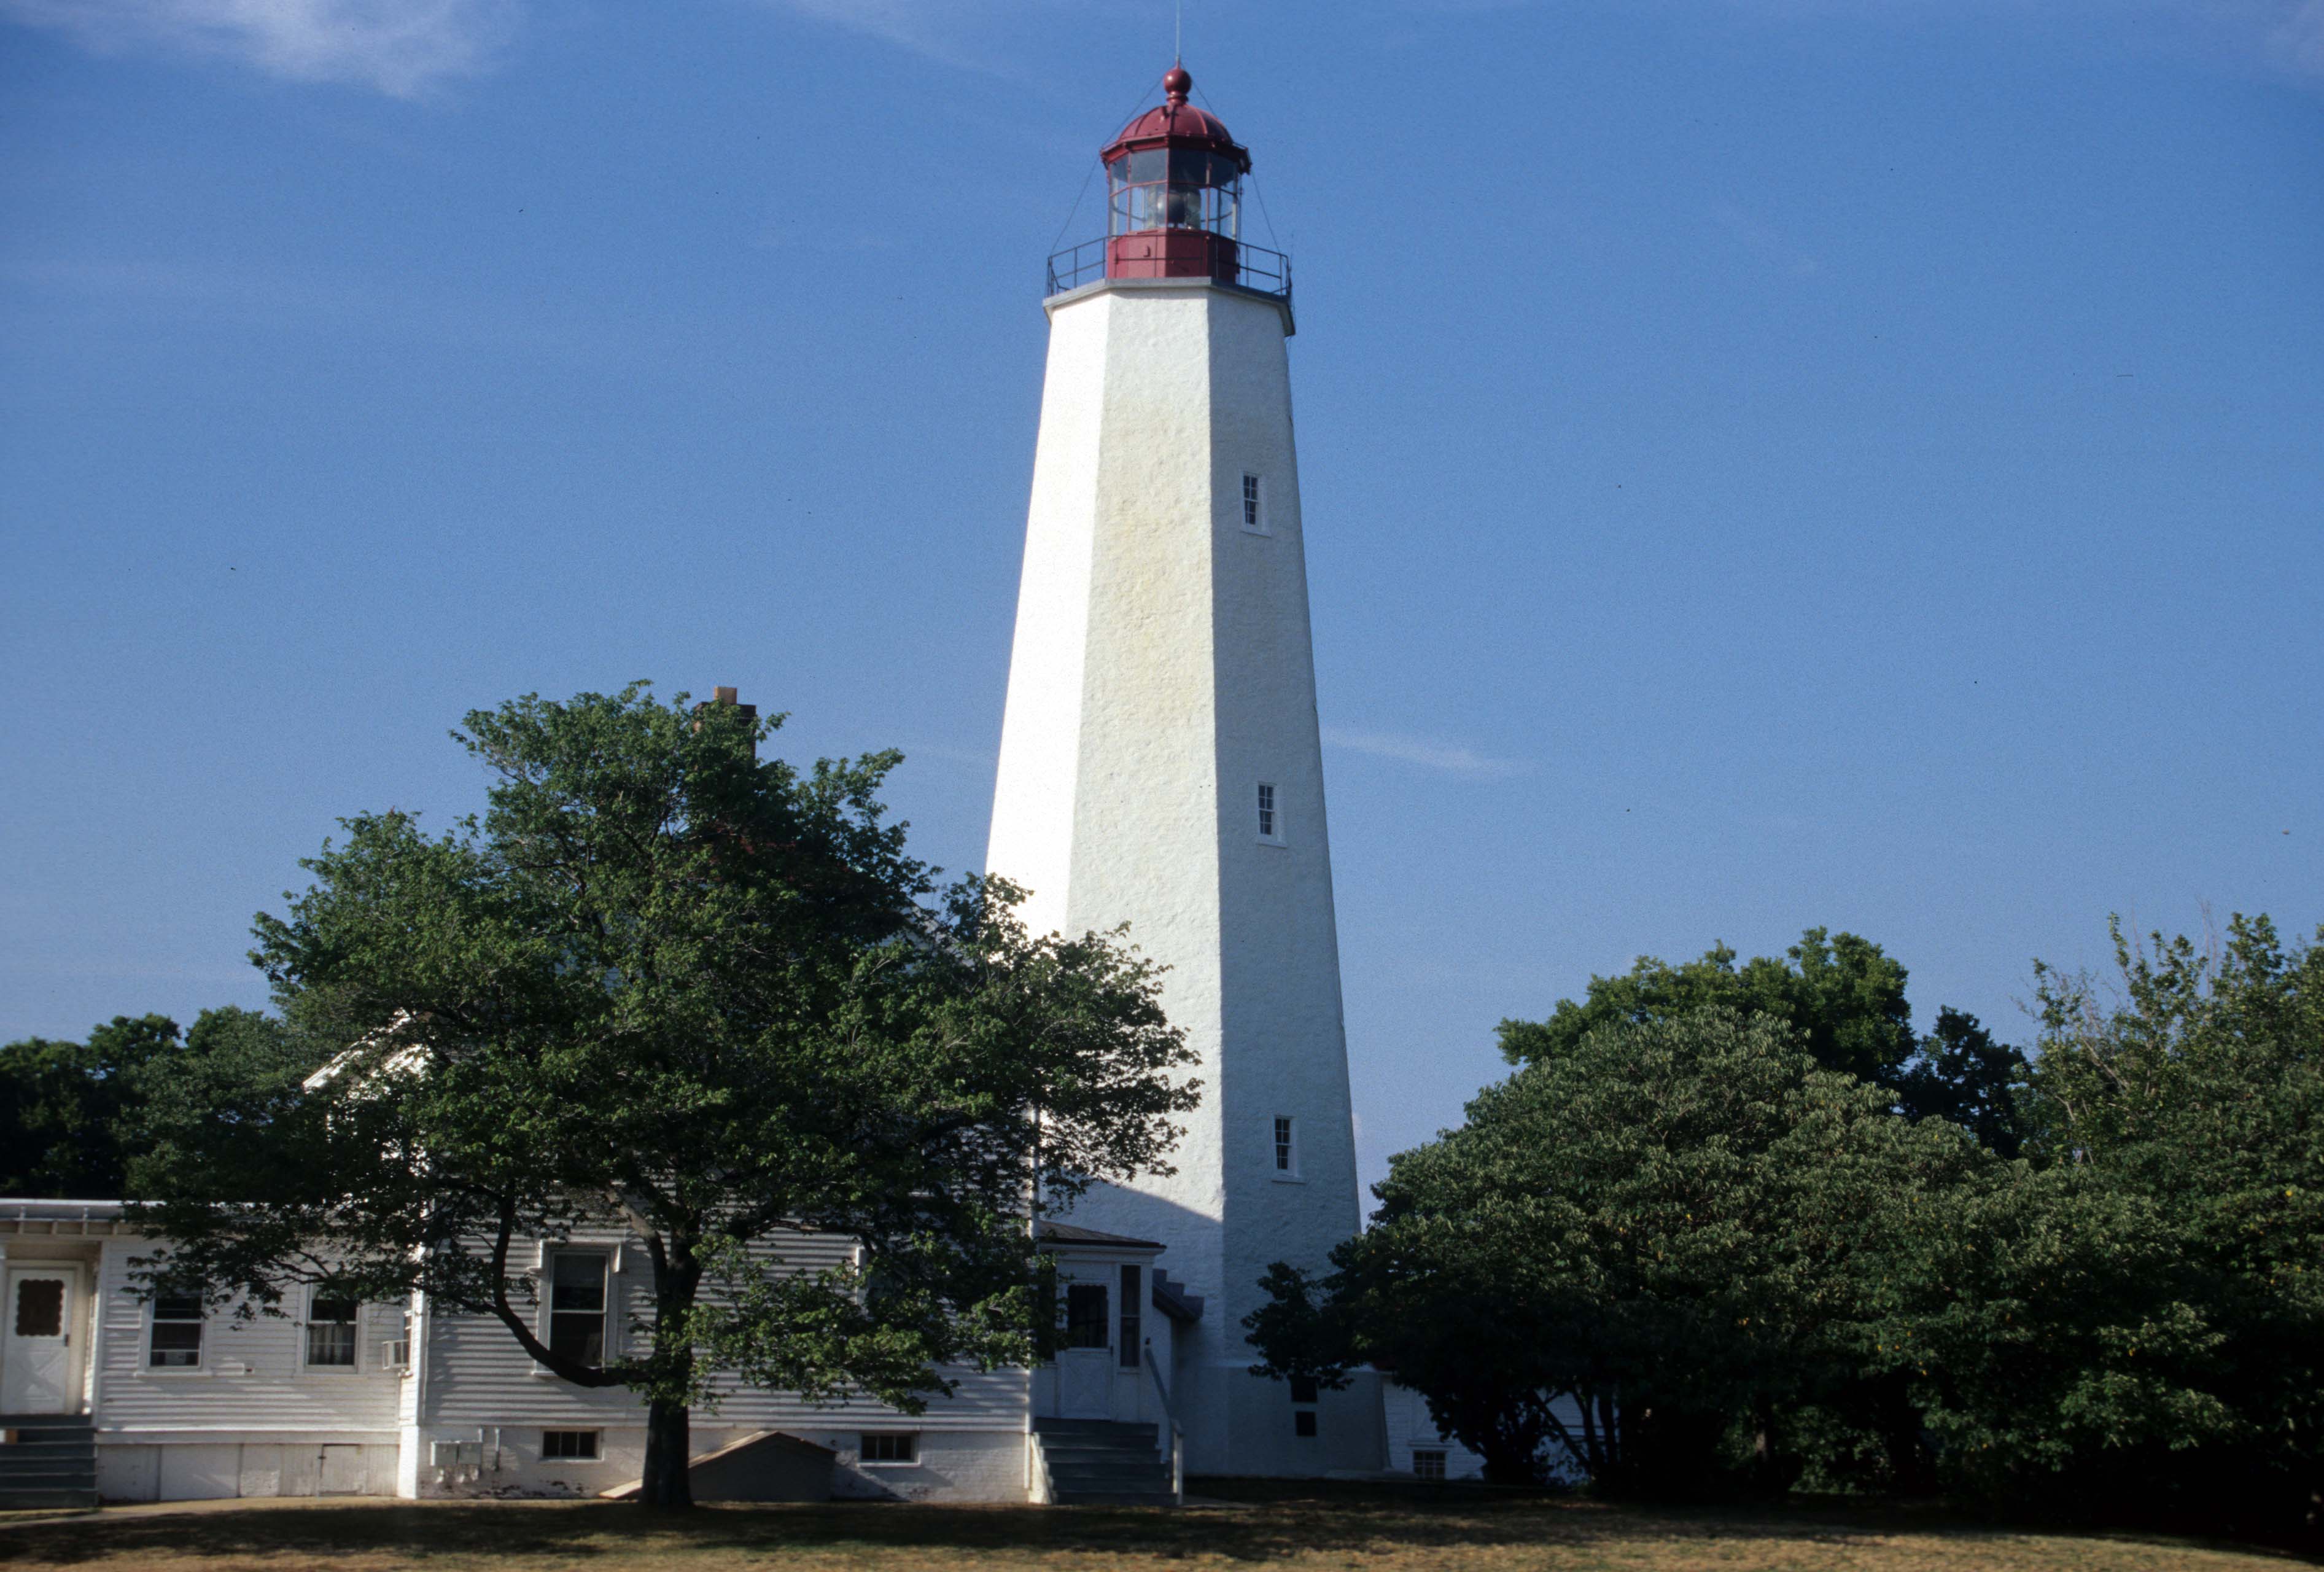 The Sandy Hook lighthouse and keepers quarters